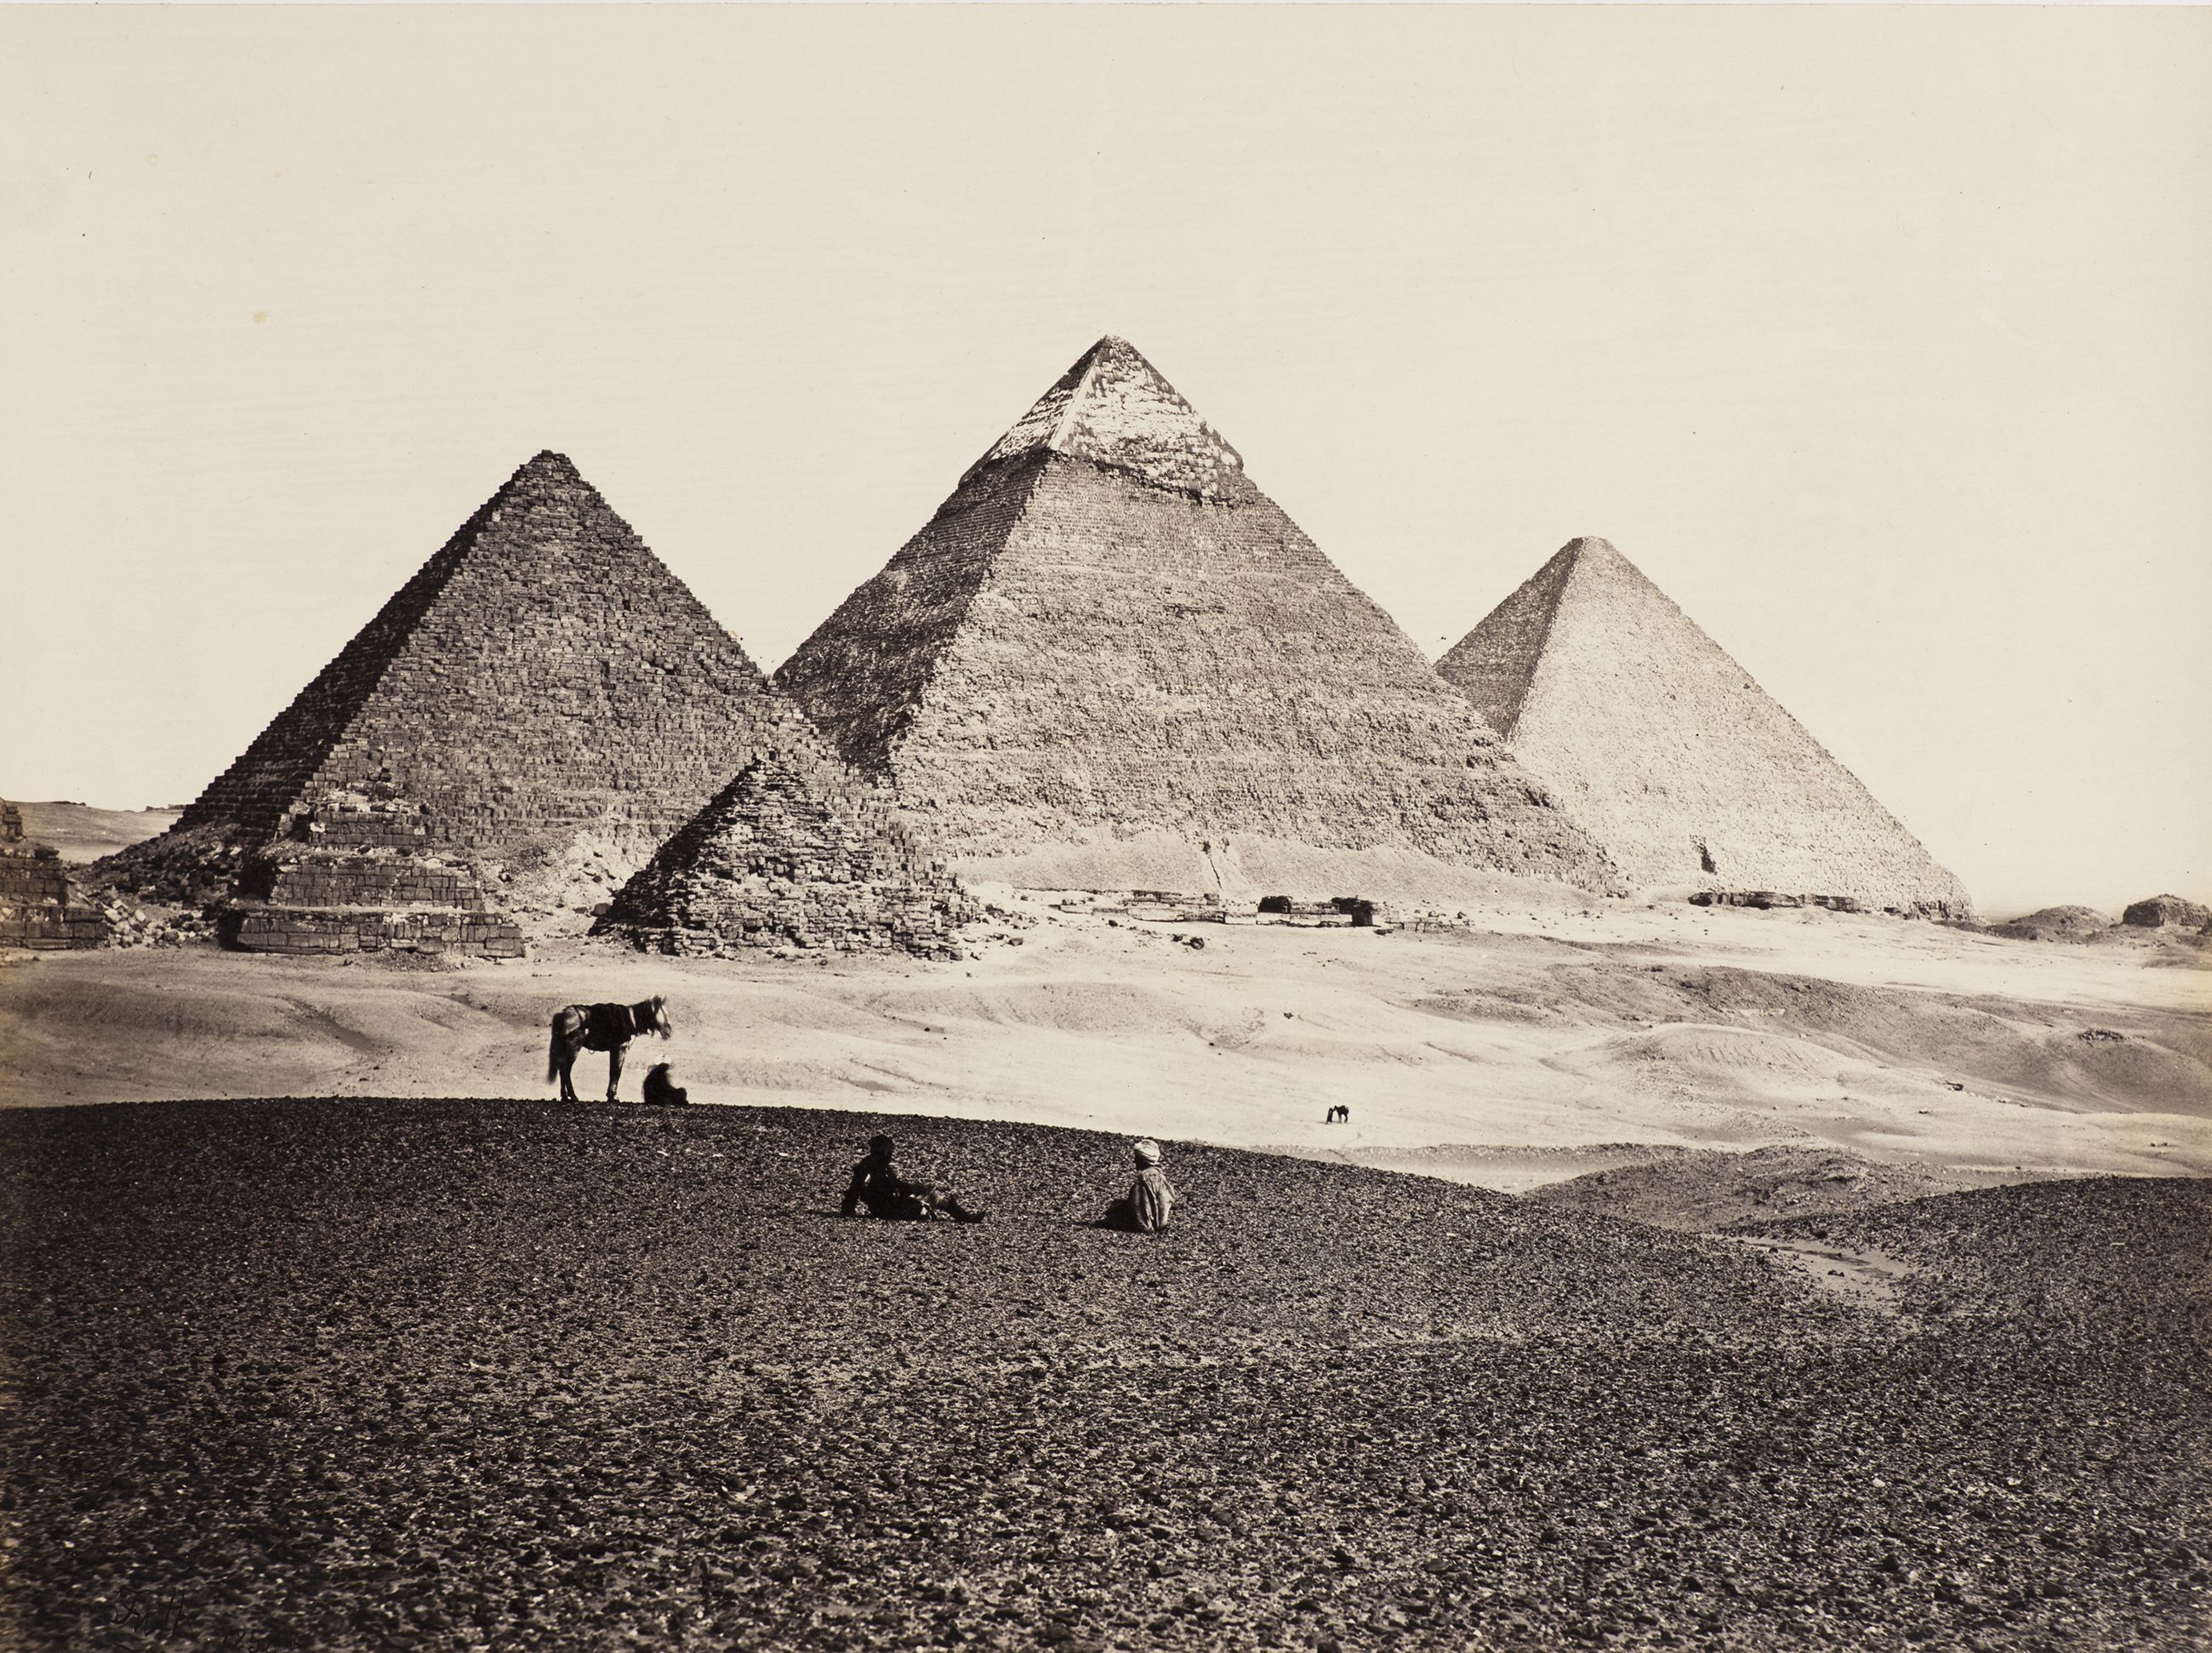 Francis Frith (English, 1822–1898), The Pyramids of El‑Geezeh, from the southwest, from Egypt, Sinai and Jerusalem: A Series of Twenty Photographic Views, c. 1860. Albumen print. Clark Art Institute, 1998.42.3.12